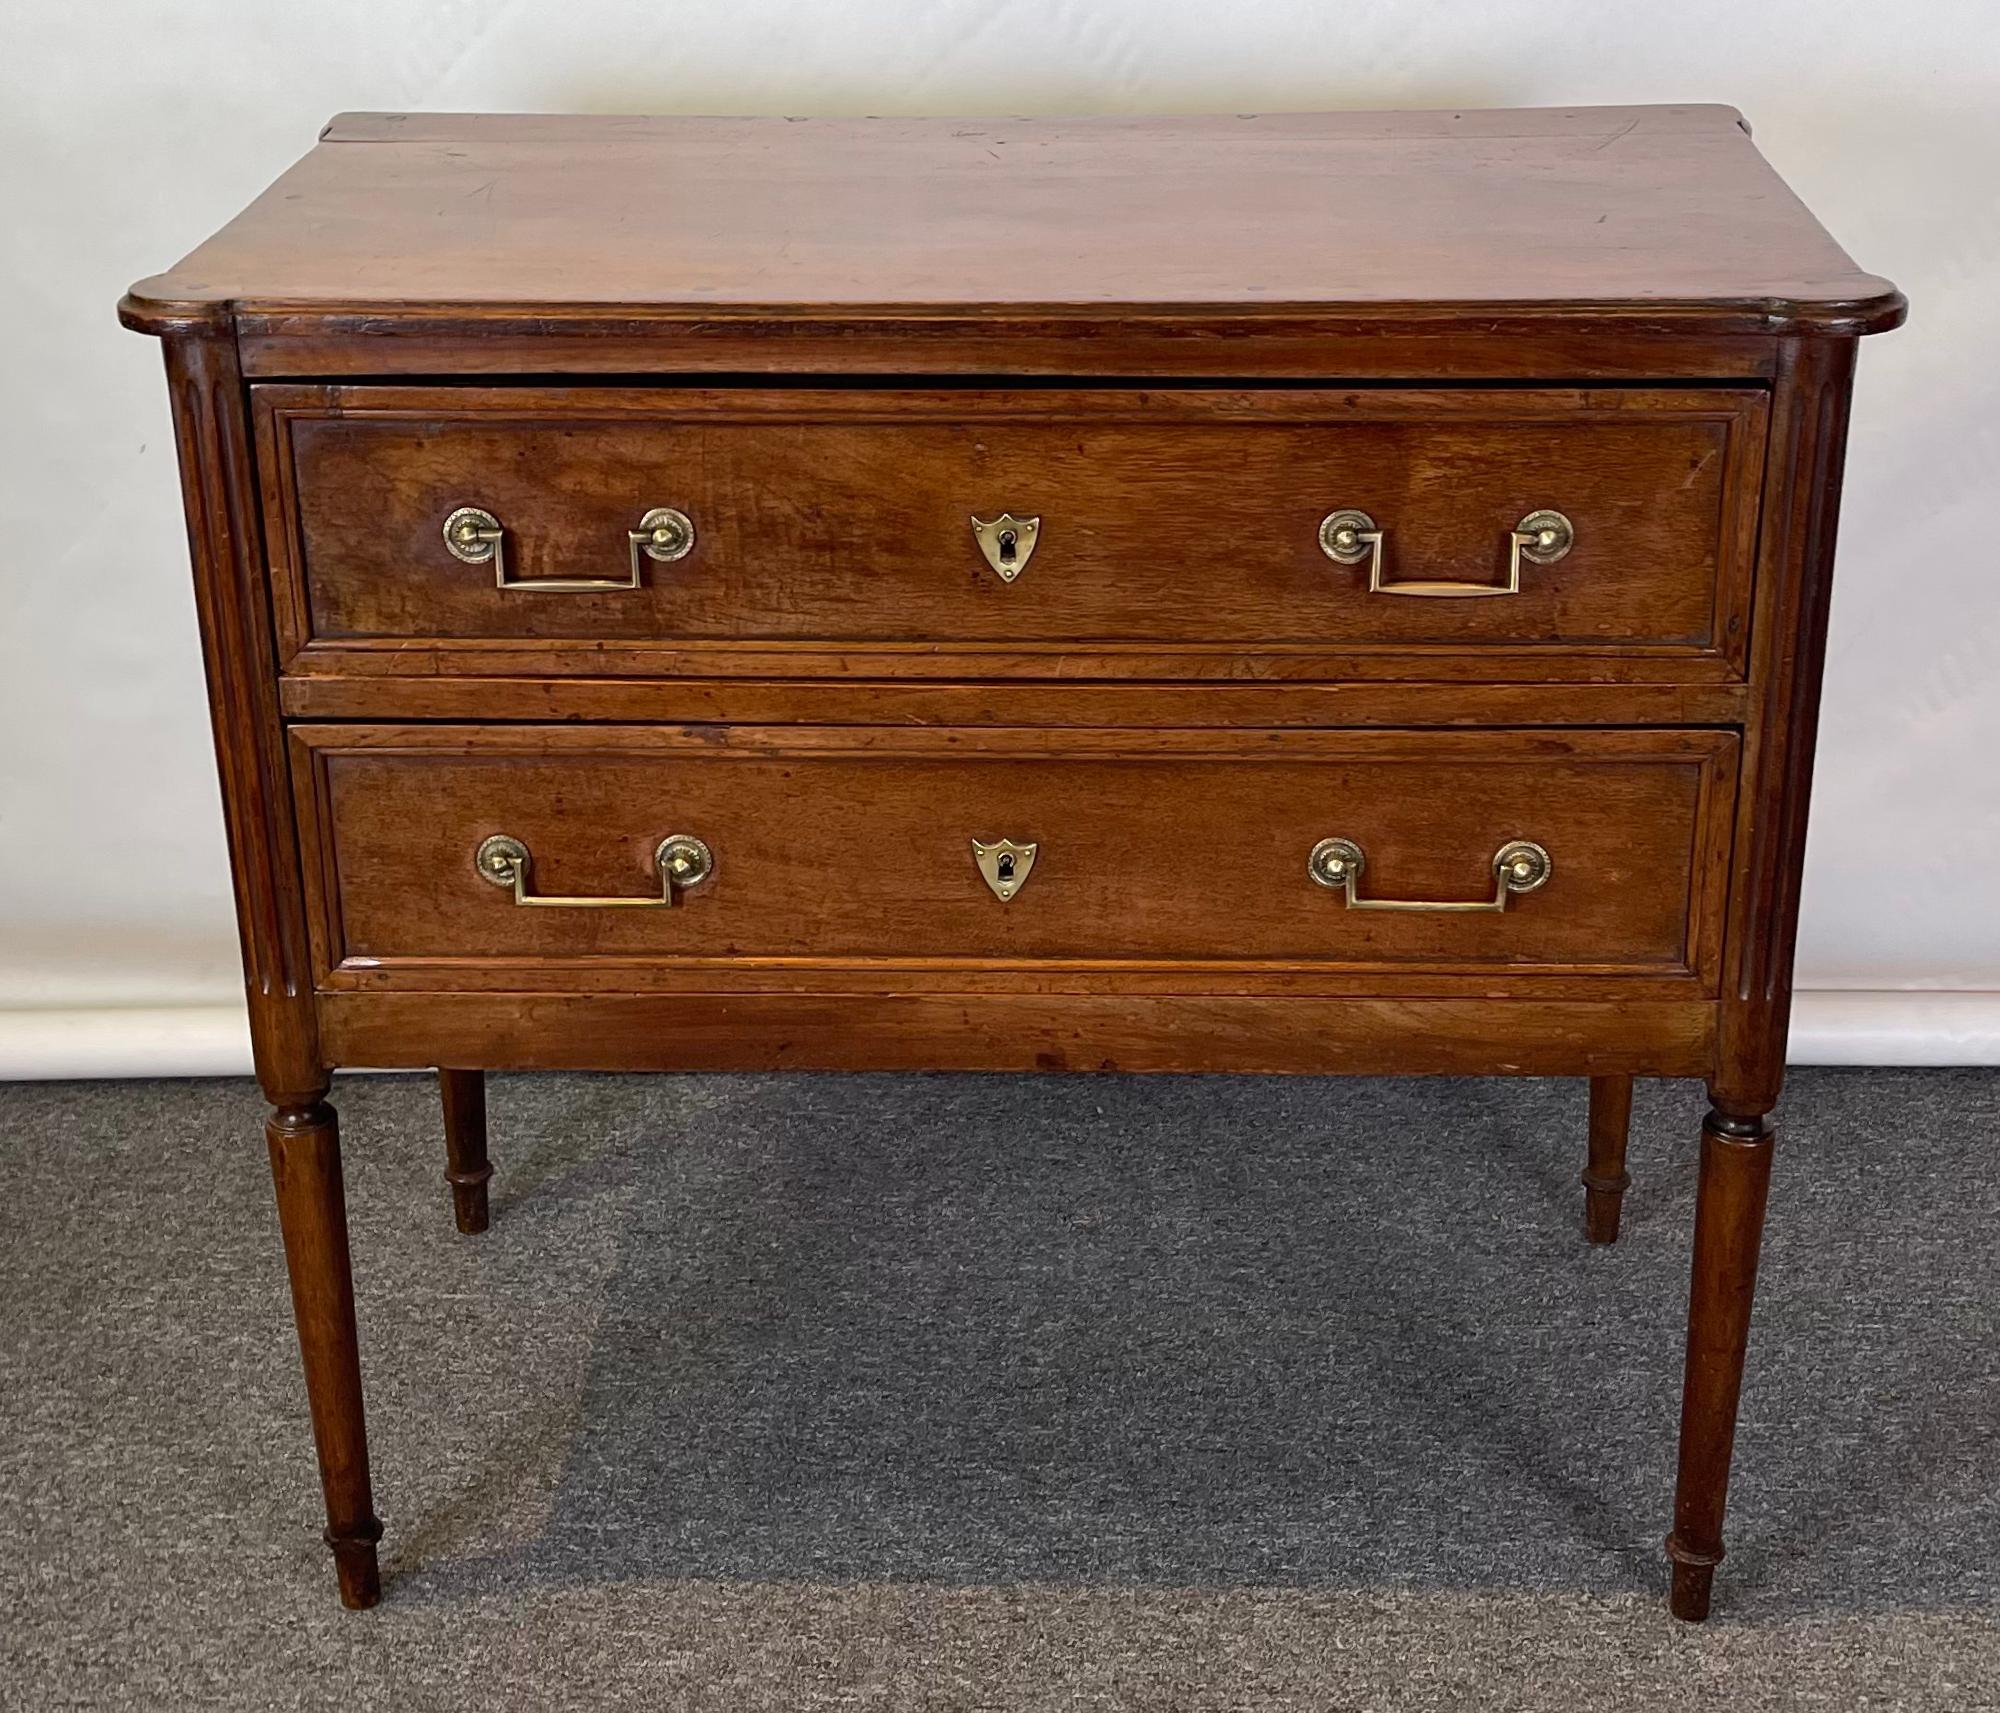 A late 19th C. French Directoire style two drawer cherrywood commode with lovely mellow patina on delicately turned legs.